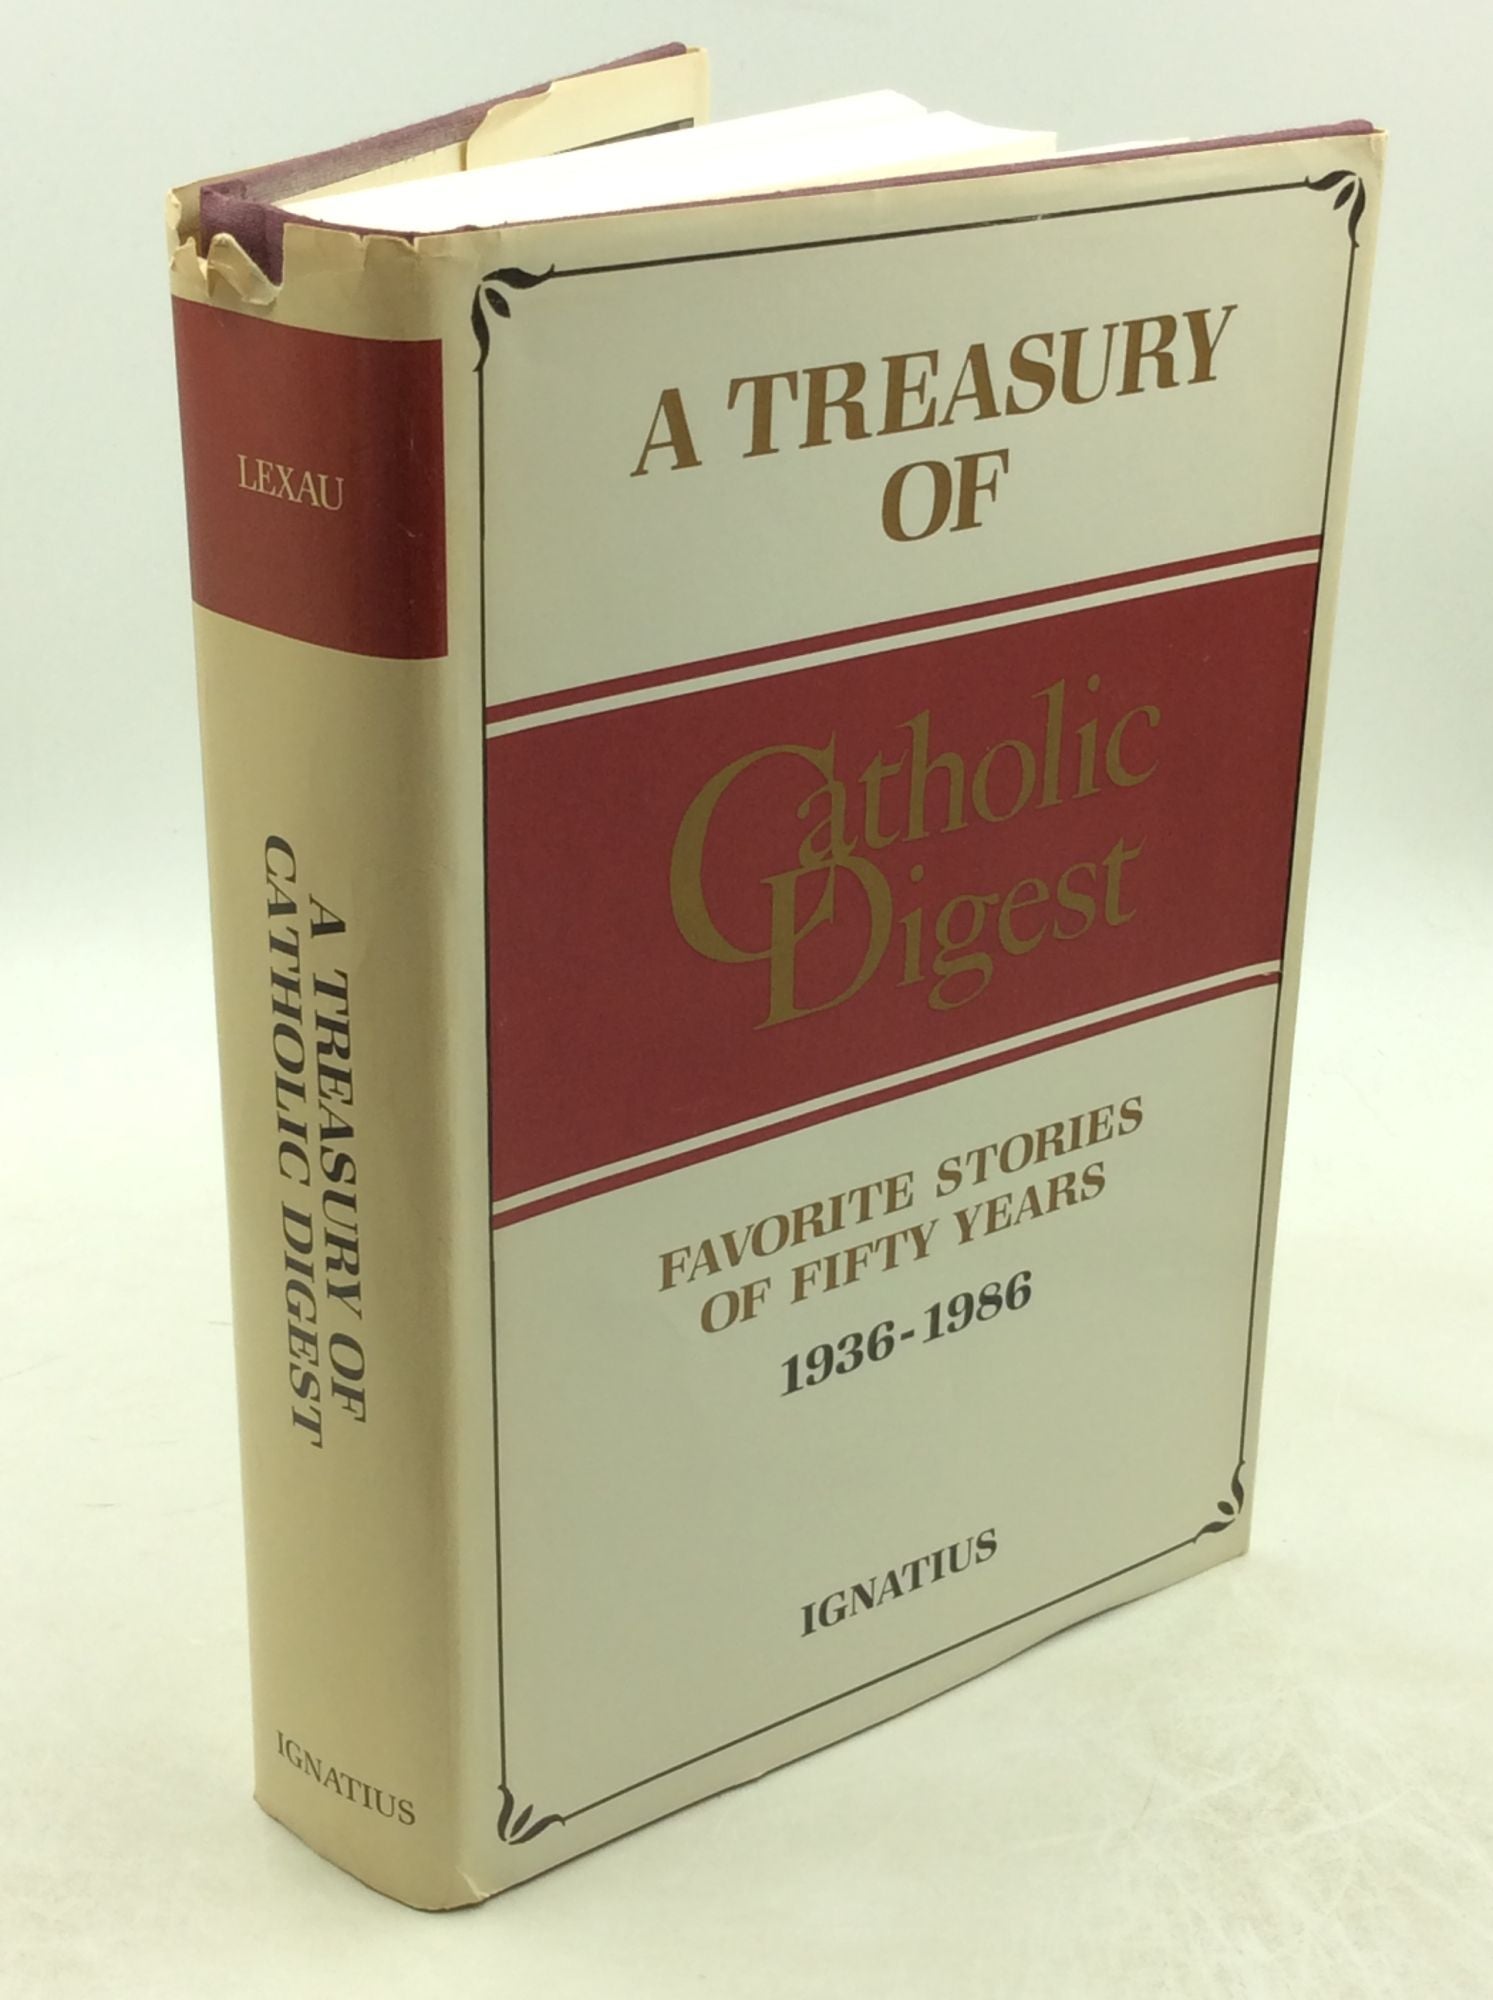 Henry Lexau, comp - A Treasury of Catholic Digest: Favorite Stories of Fifty Years 1936-1986